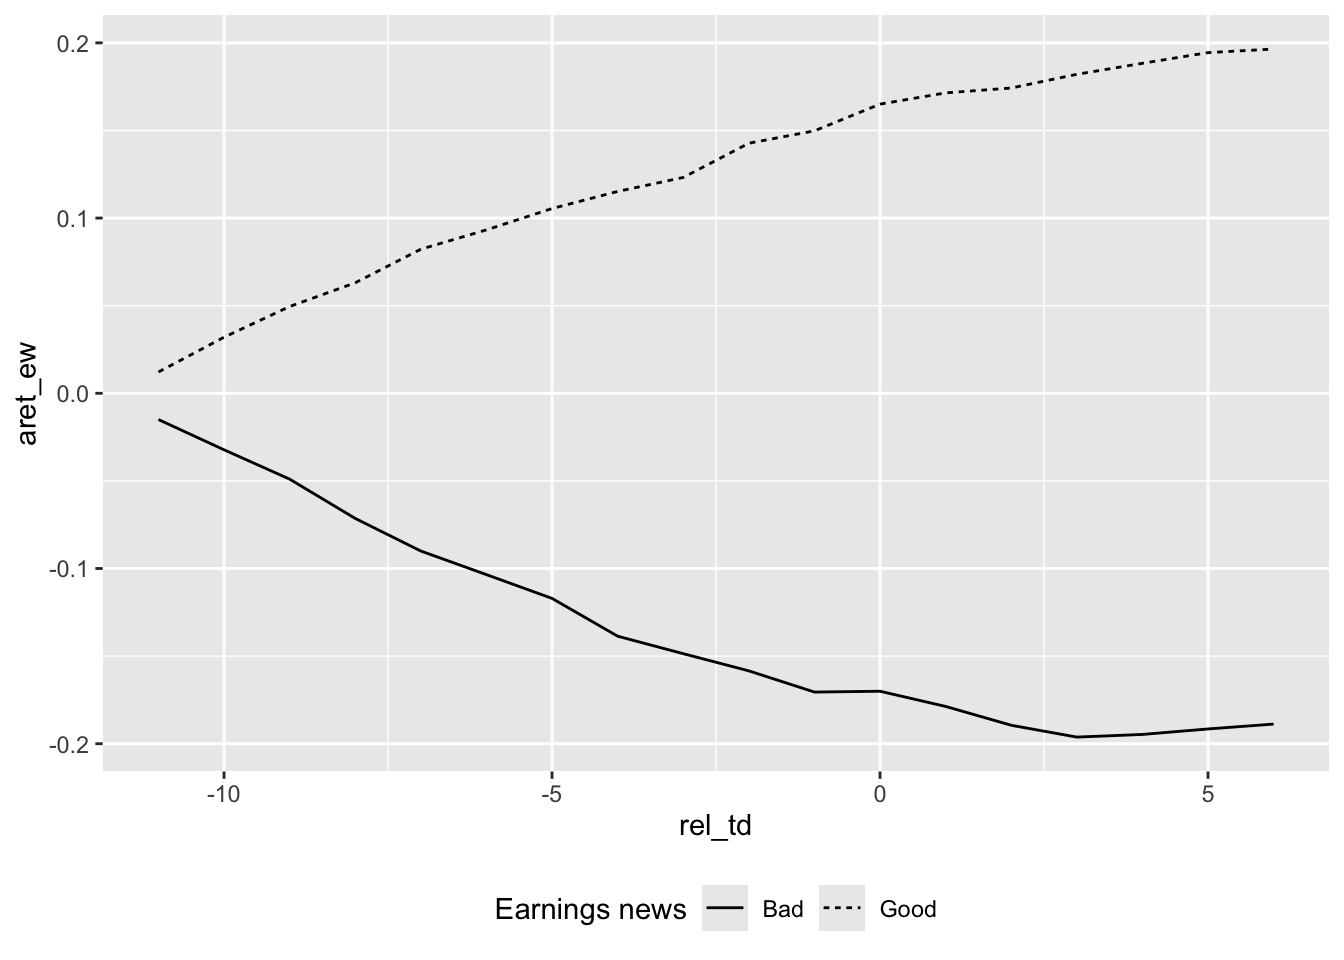 Plot of cumulative abnormal returns from month -11 to month +6 for two earnings portfolios formed based on the sign of earnings news at announcement (month 0). Plot shows consistent positive returns for the good news portfolio up to month 0 and consistent negative returns for the bad news portfolio up to month 0. There are signs that the two lines continue to diverge even after month 0.